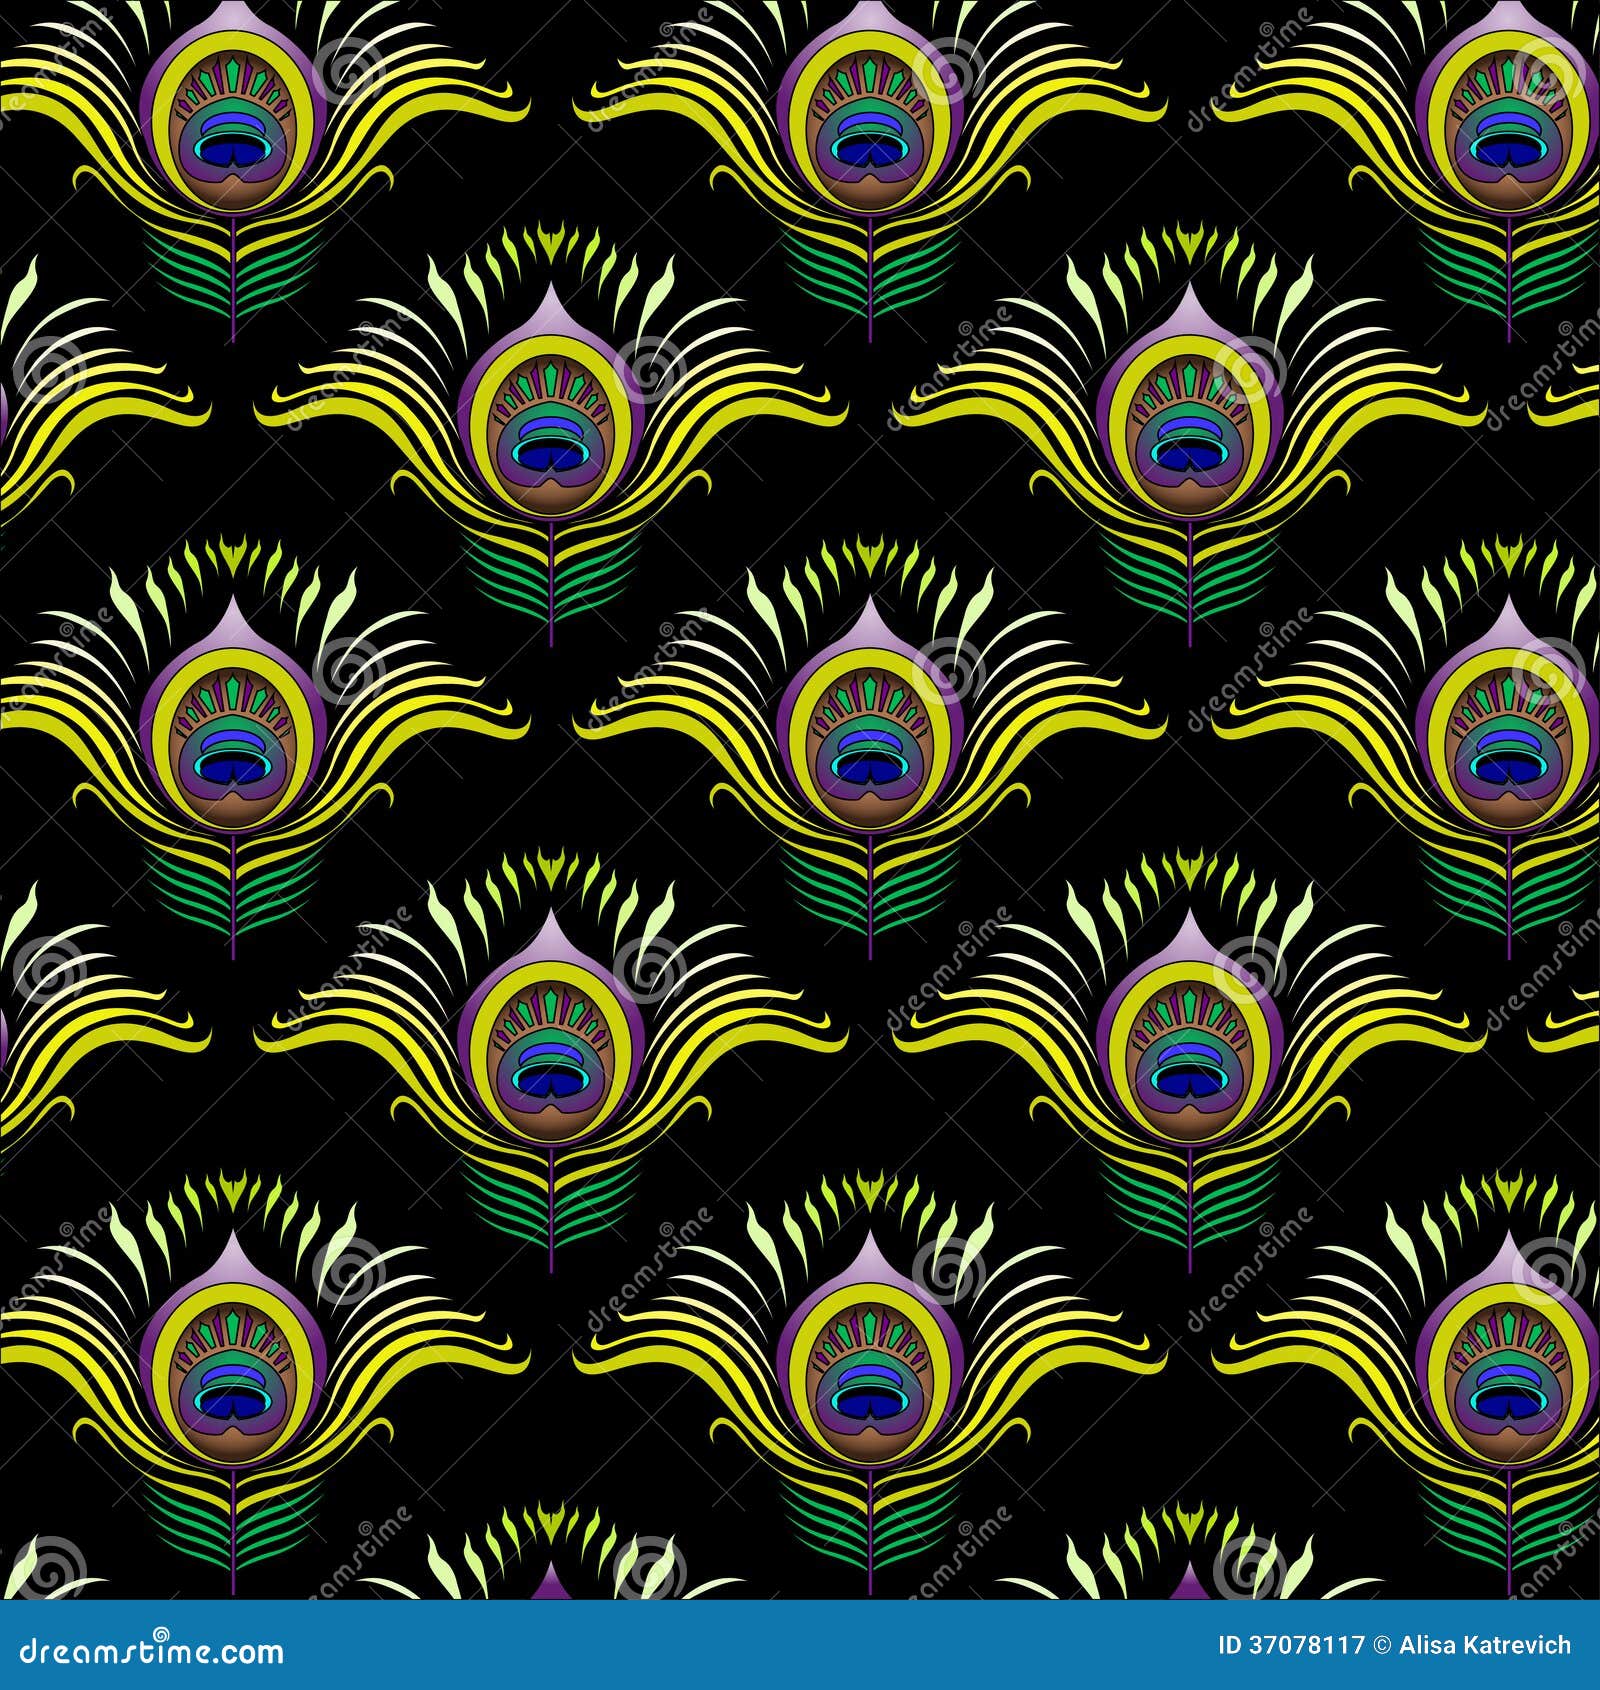 Download Peacock Feathers Vector Seamless Pattern Stock Vector ...